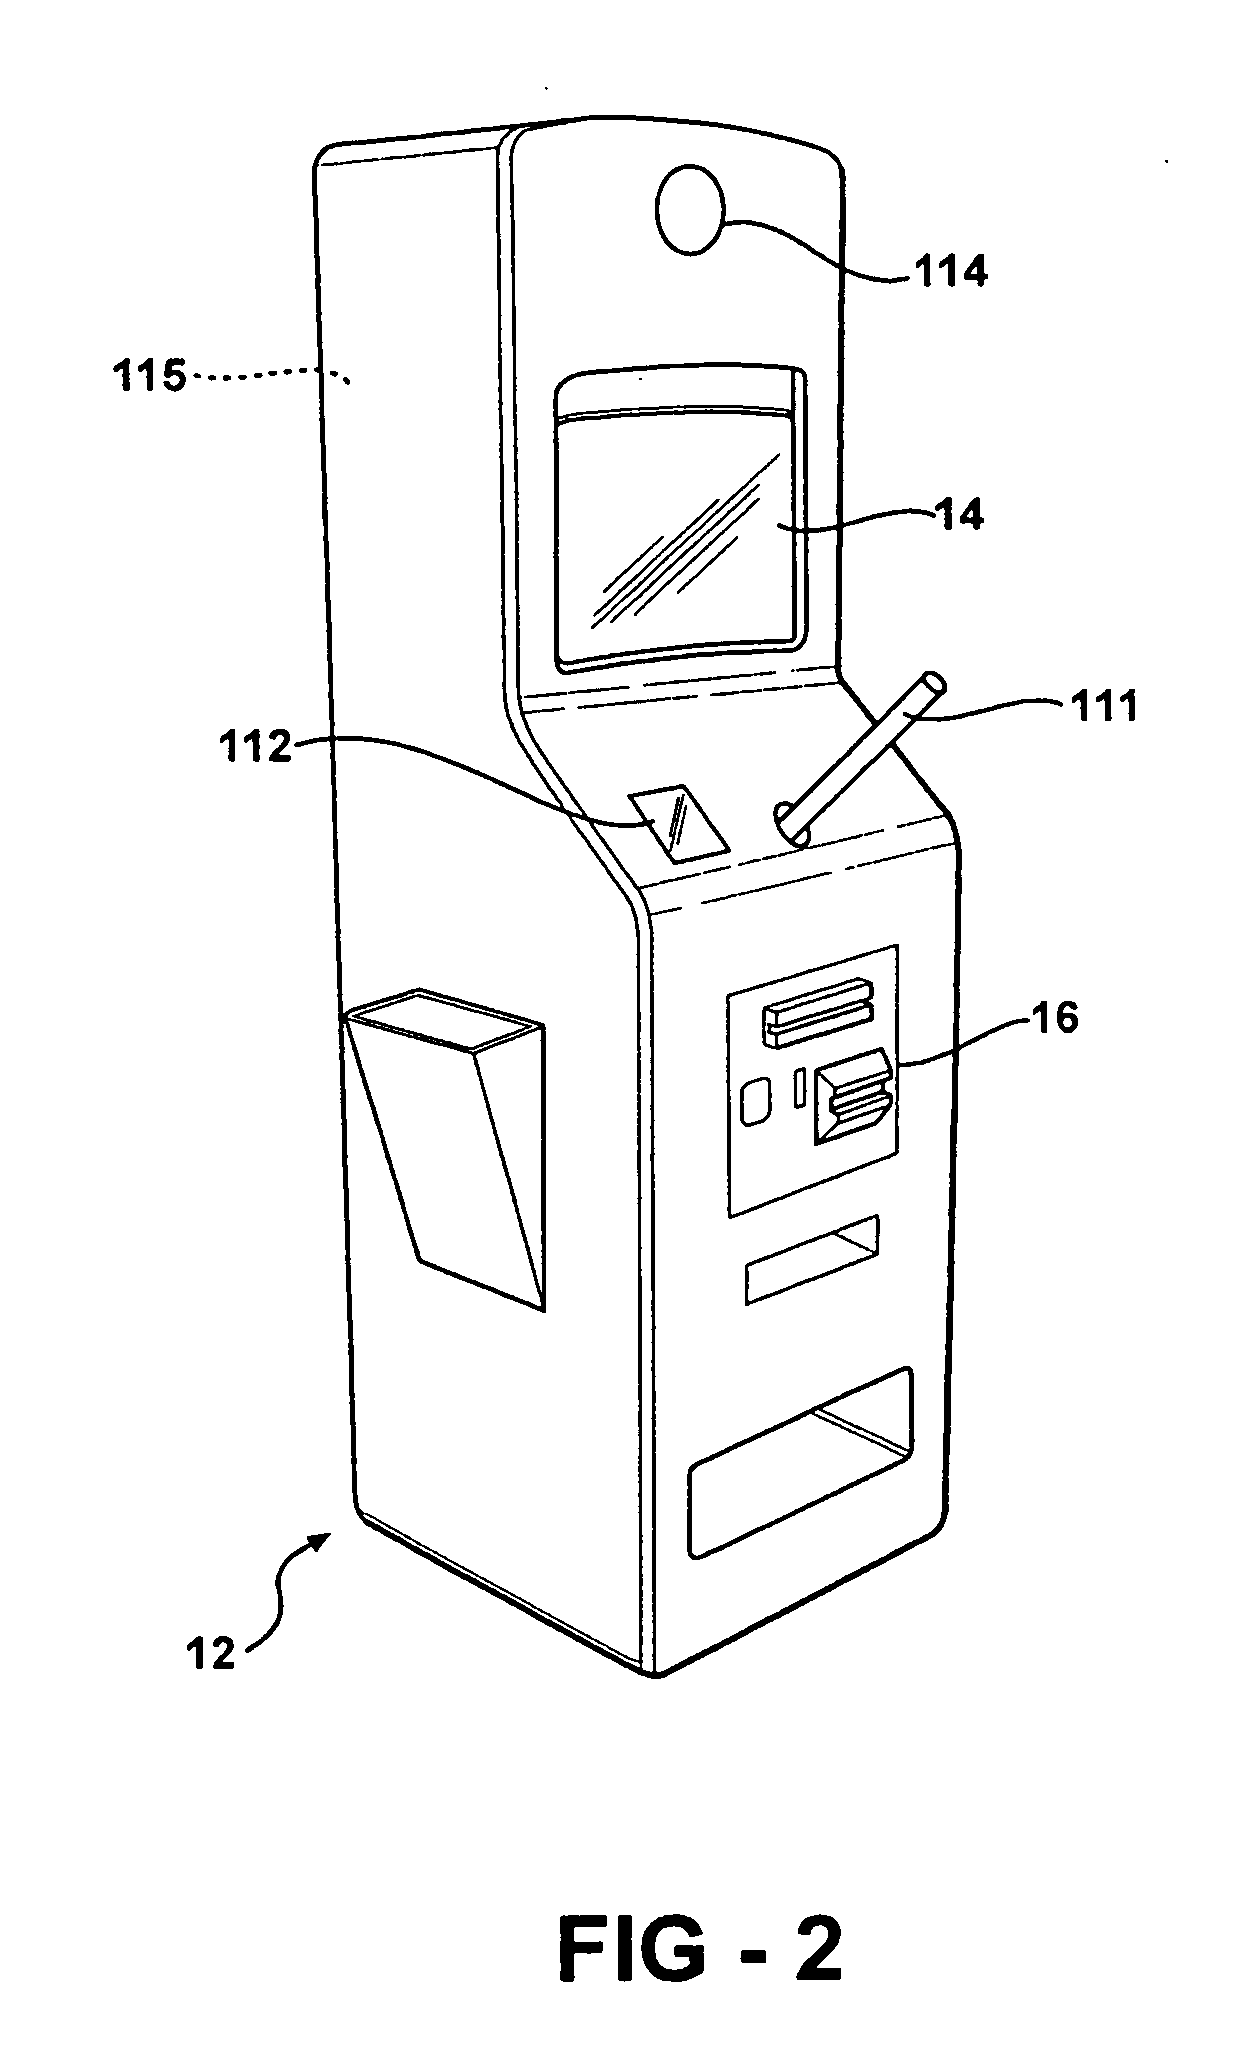 Method and apparatus for a self-service kiosk system for collecting and reporting blood alcohol level